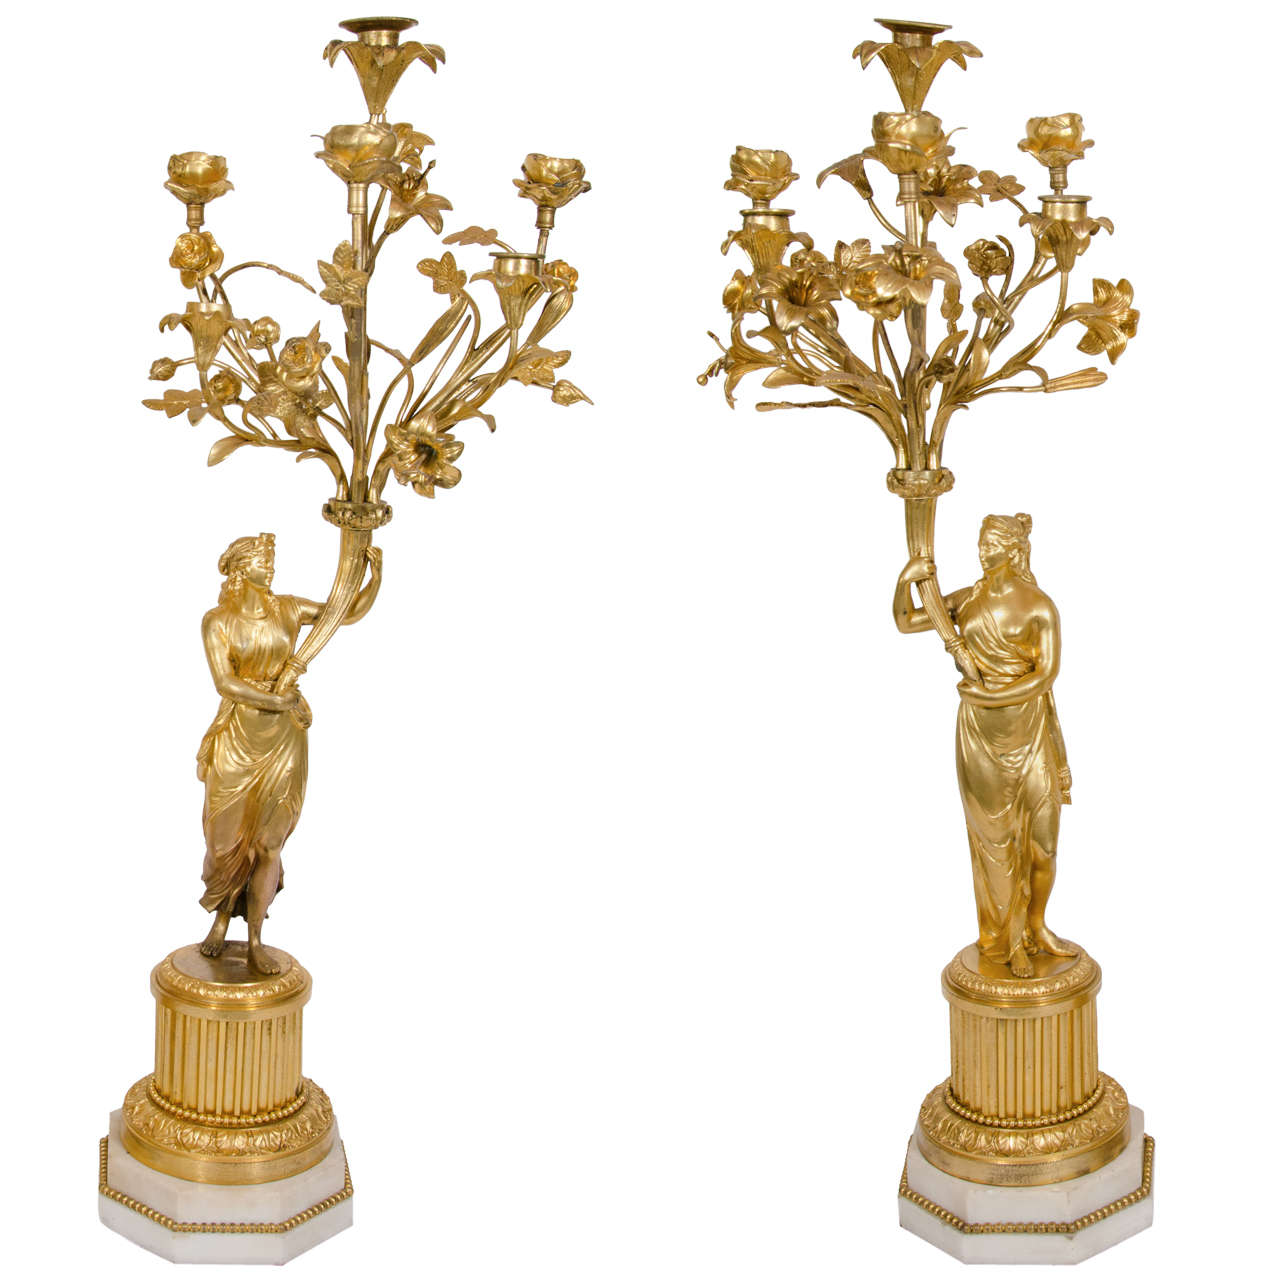 Pair of Large Antique French Louis XVI Style Gilt Bronze Figural Candelabras For Sale